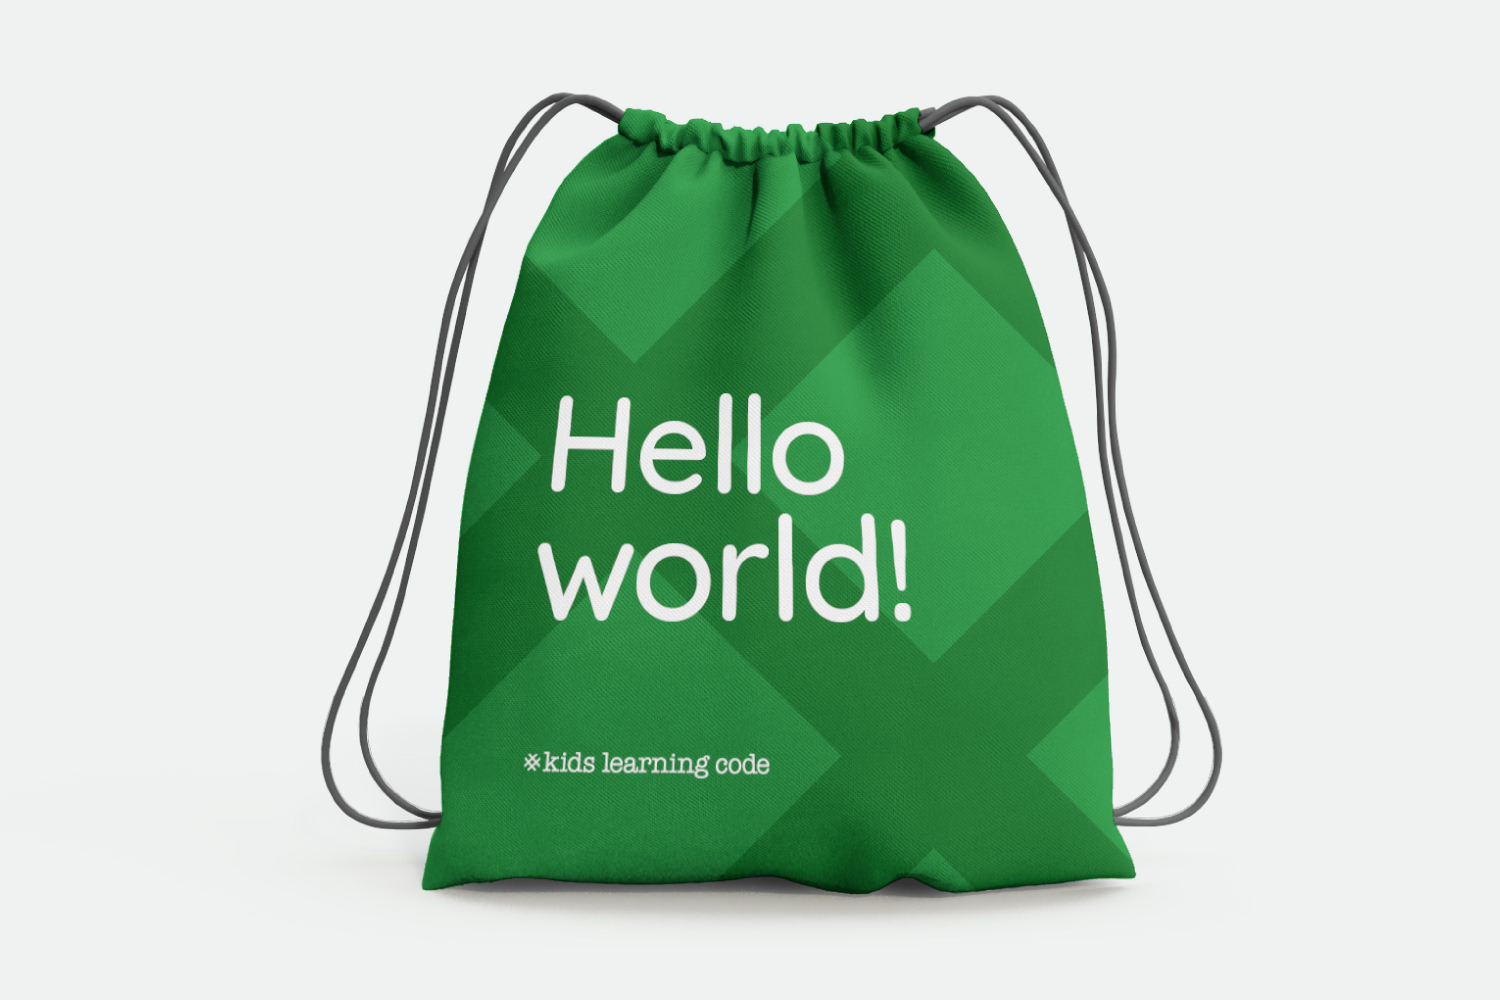 Example promo swag design for Kids Learning Code